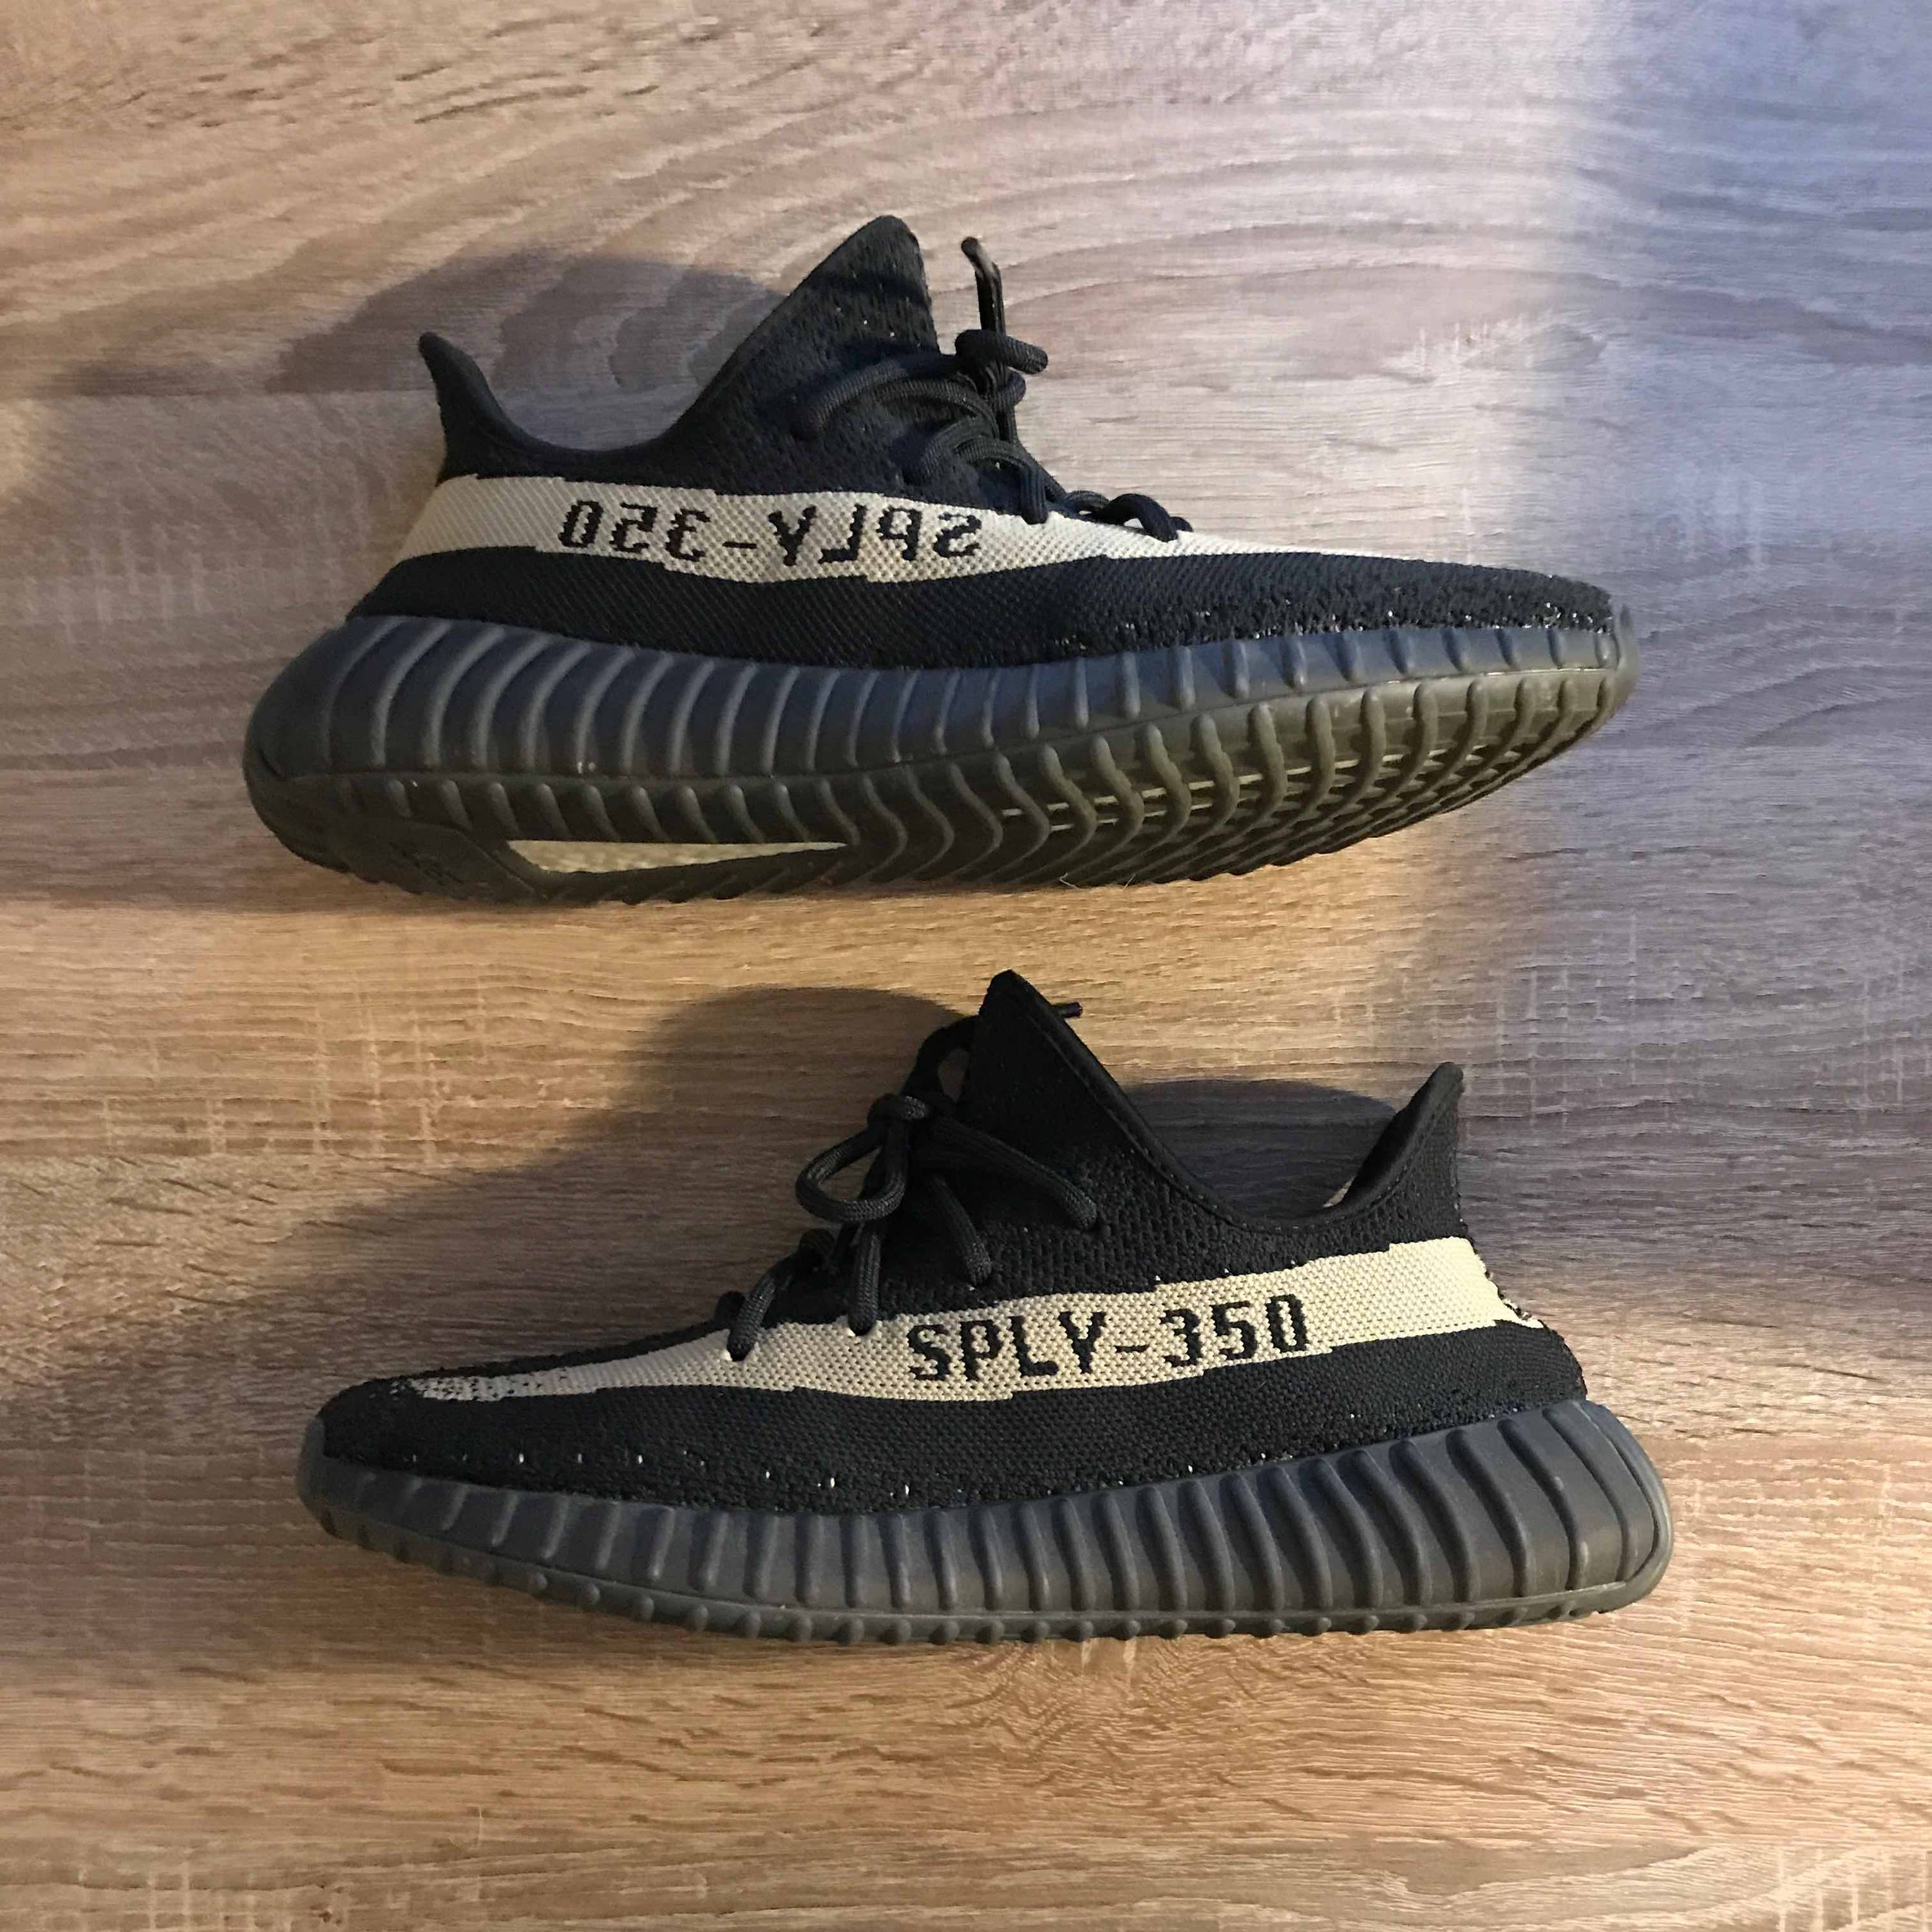 Yeezy Boost 350 V2 'Green' - adidas - BY9611 | GOAT